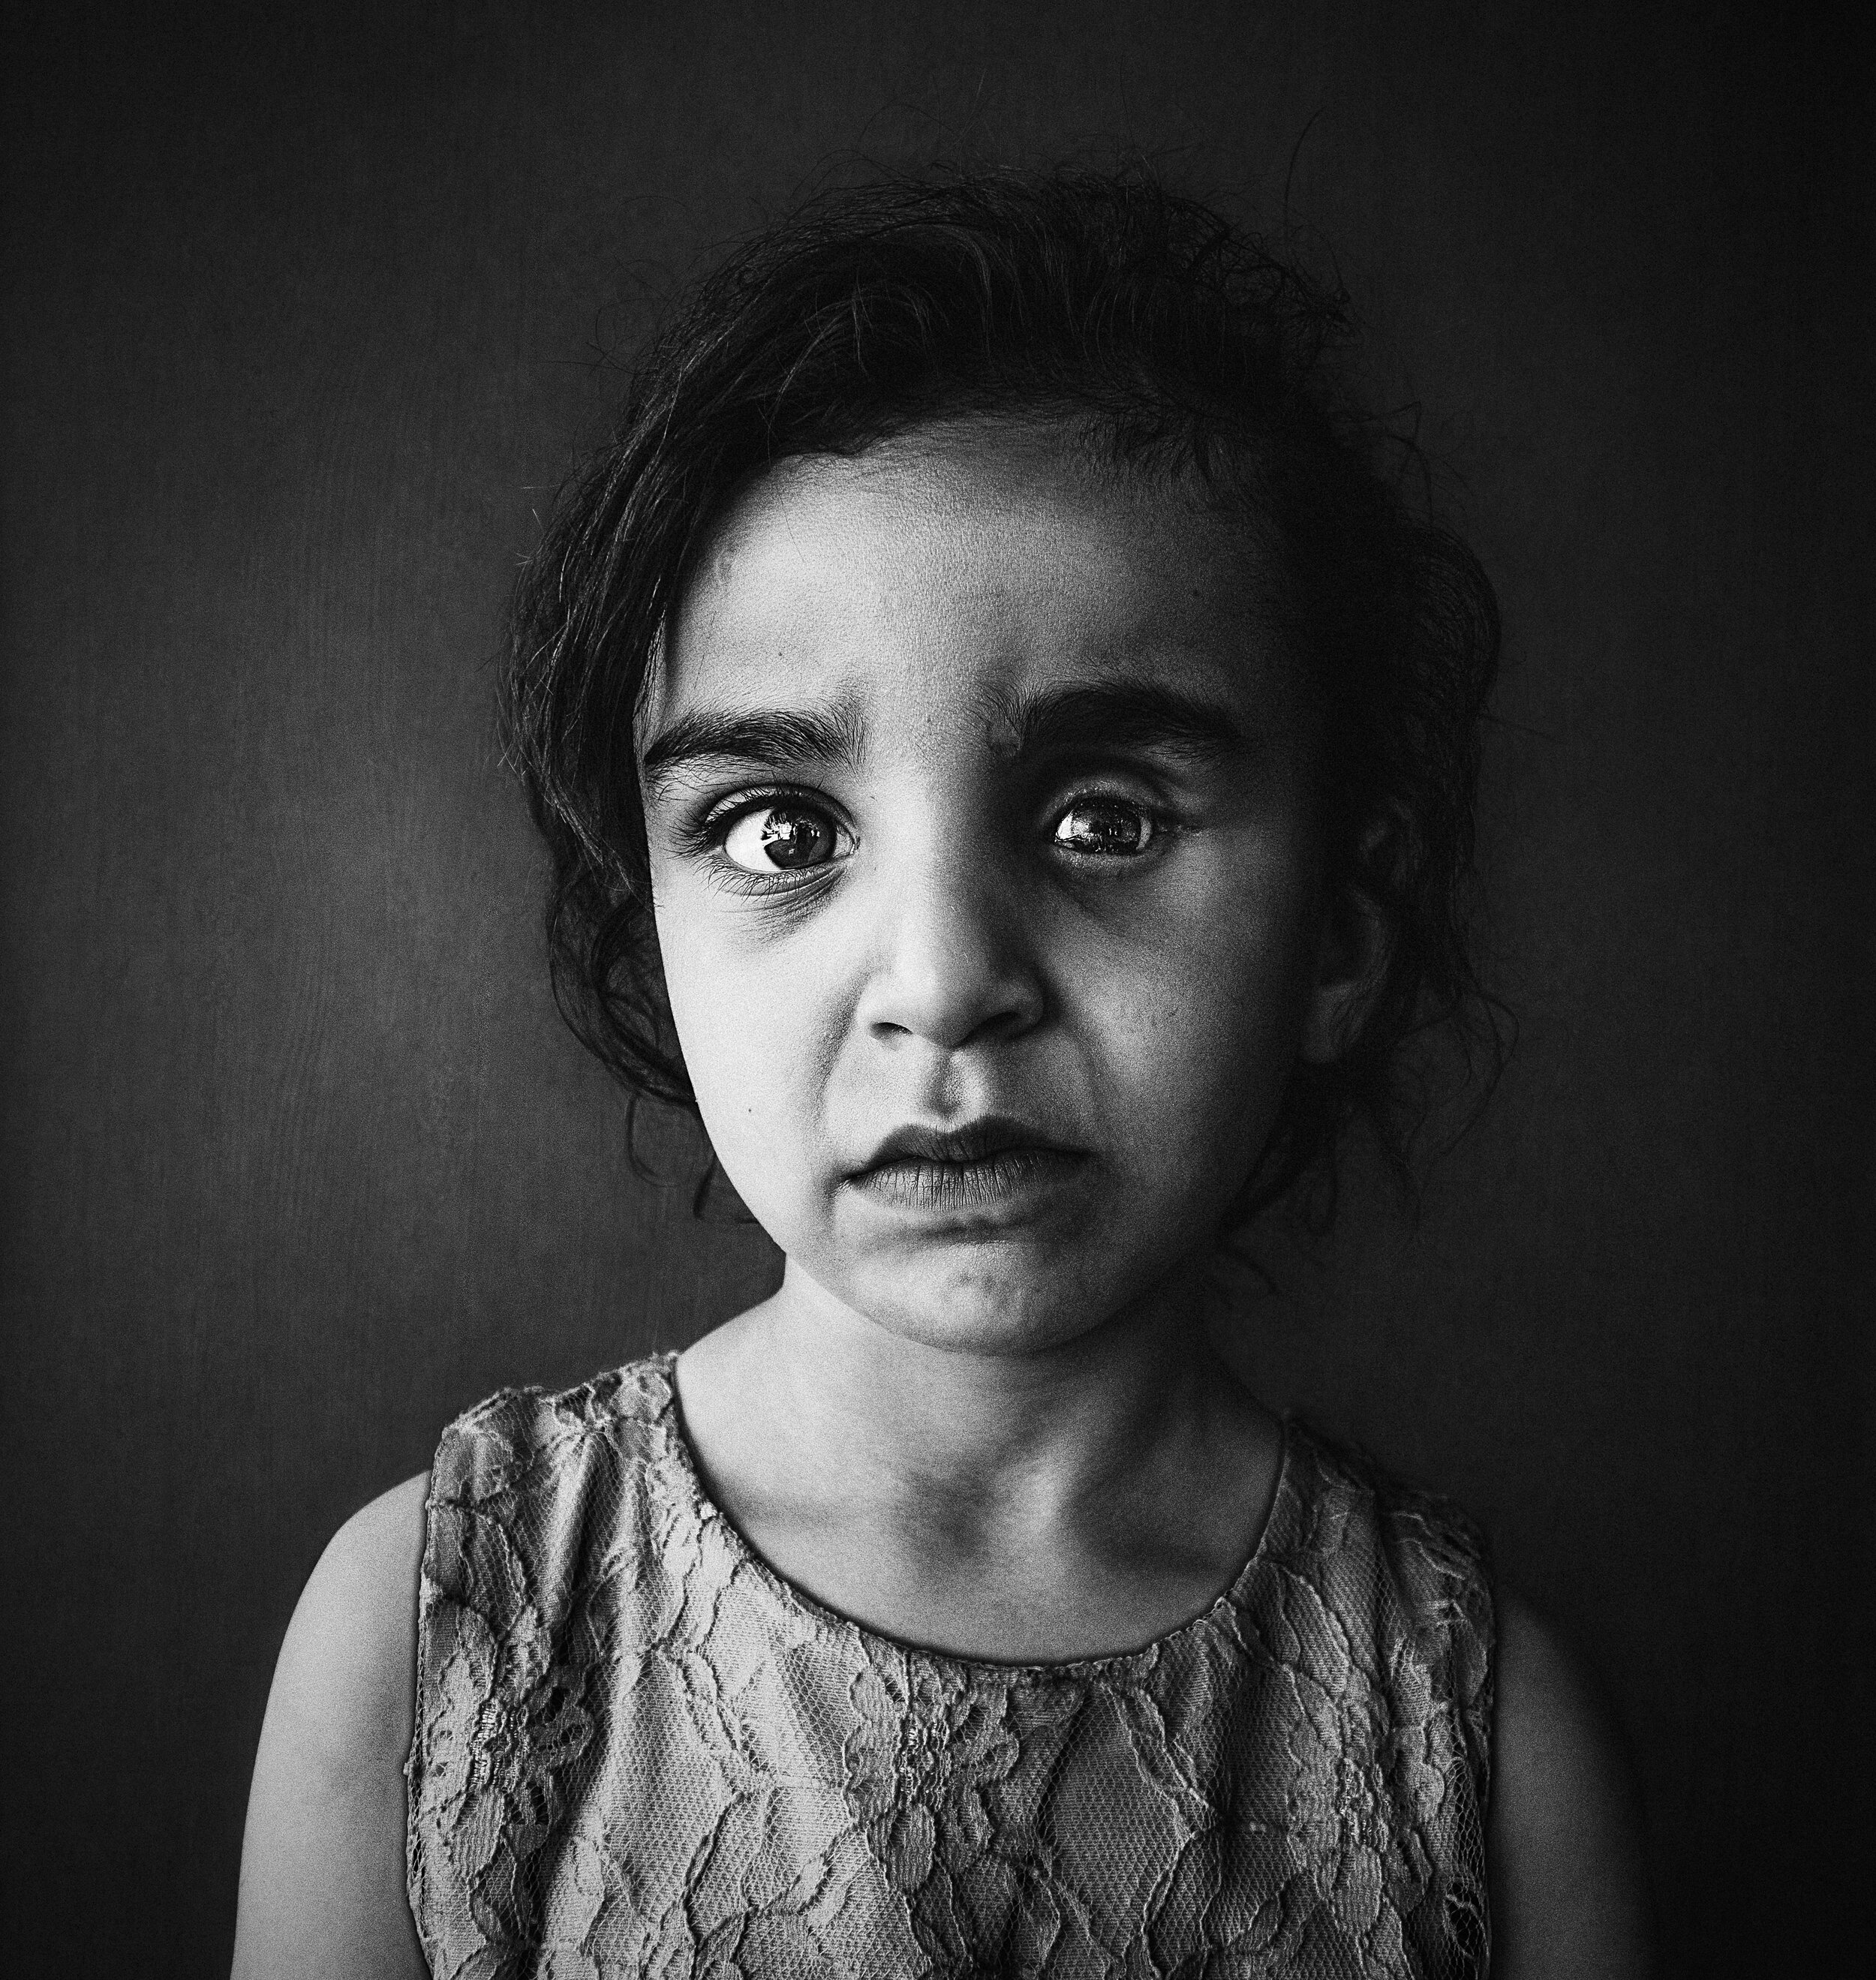 Lene Marie Fossen - Refugee Children Chios XVI 2015 - Archival Pigment Print - Size 50 x 52,78 cm - Edition of 7 + 2 AP - next available #2/10.  Courtesy WILLAS contemporary